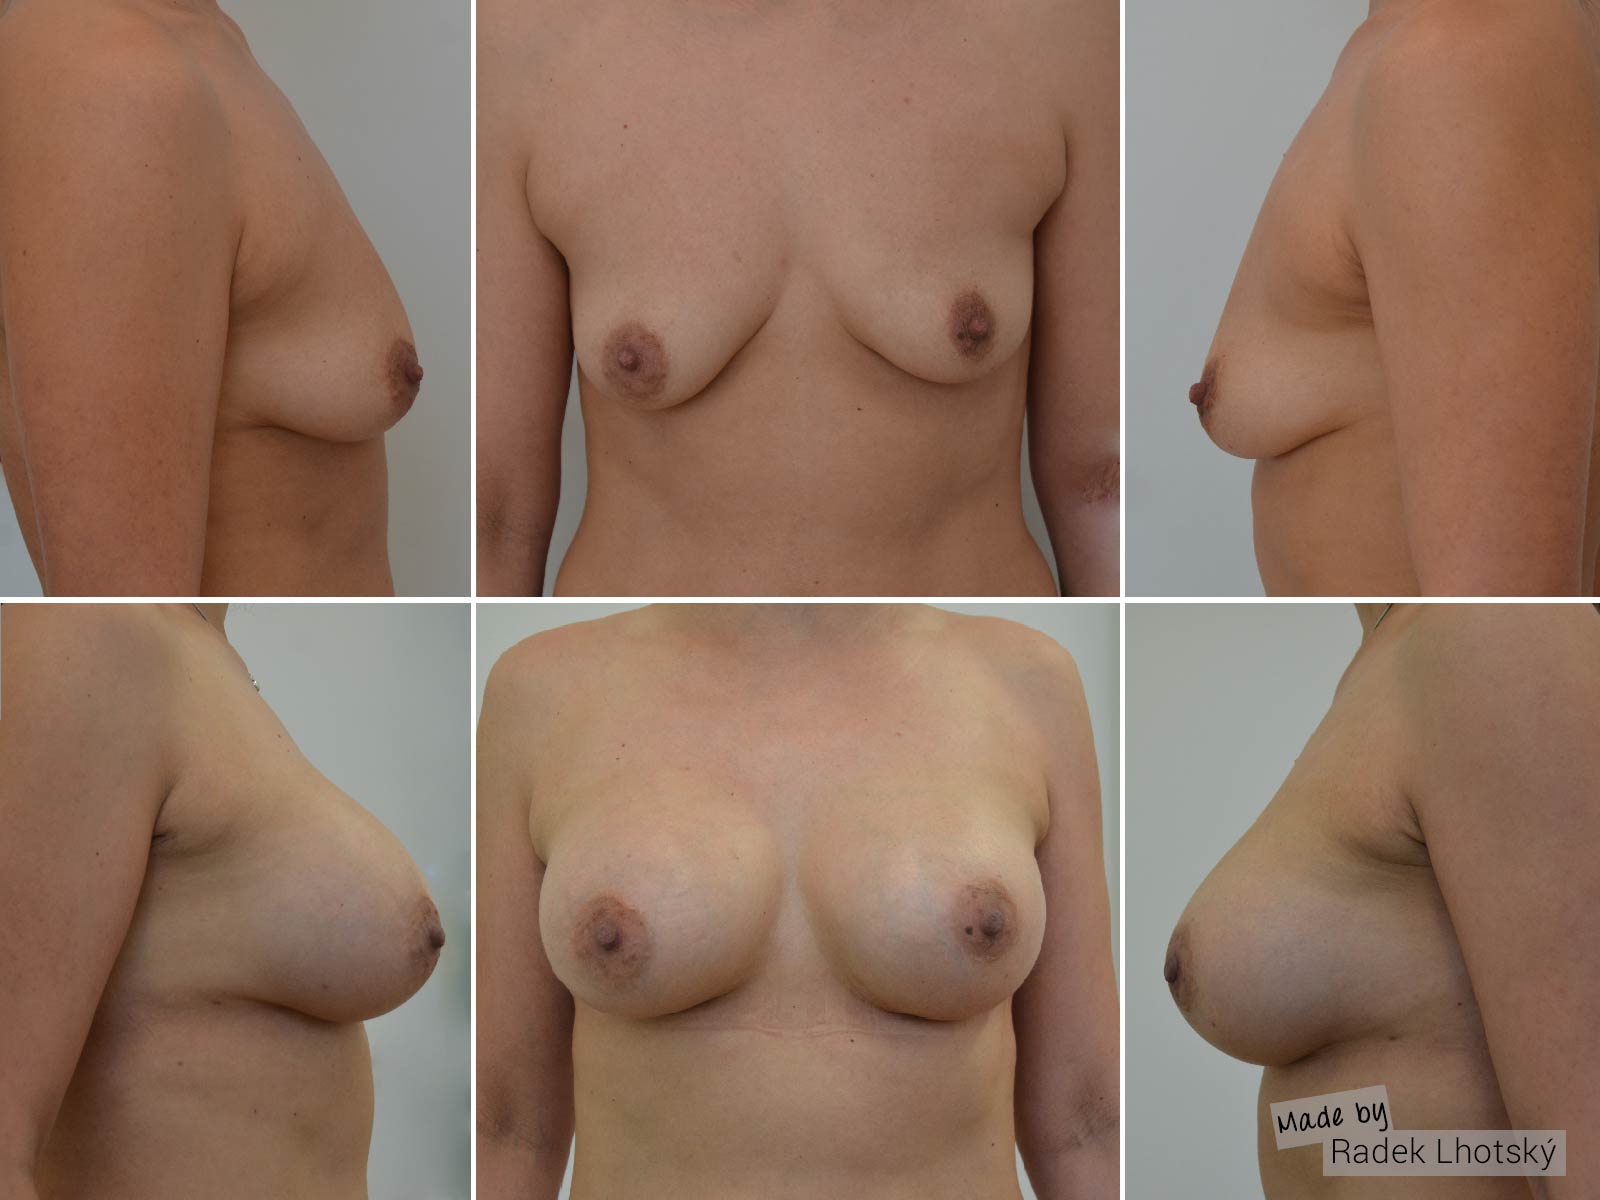 Surgery for breast asymmetry correction - before after picture, Dr. Radek Lhotsky